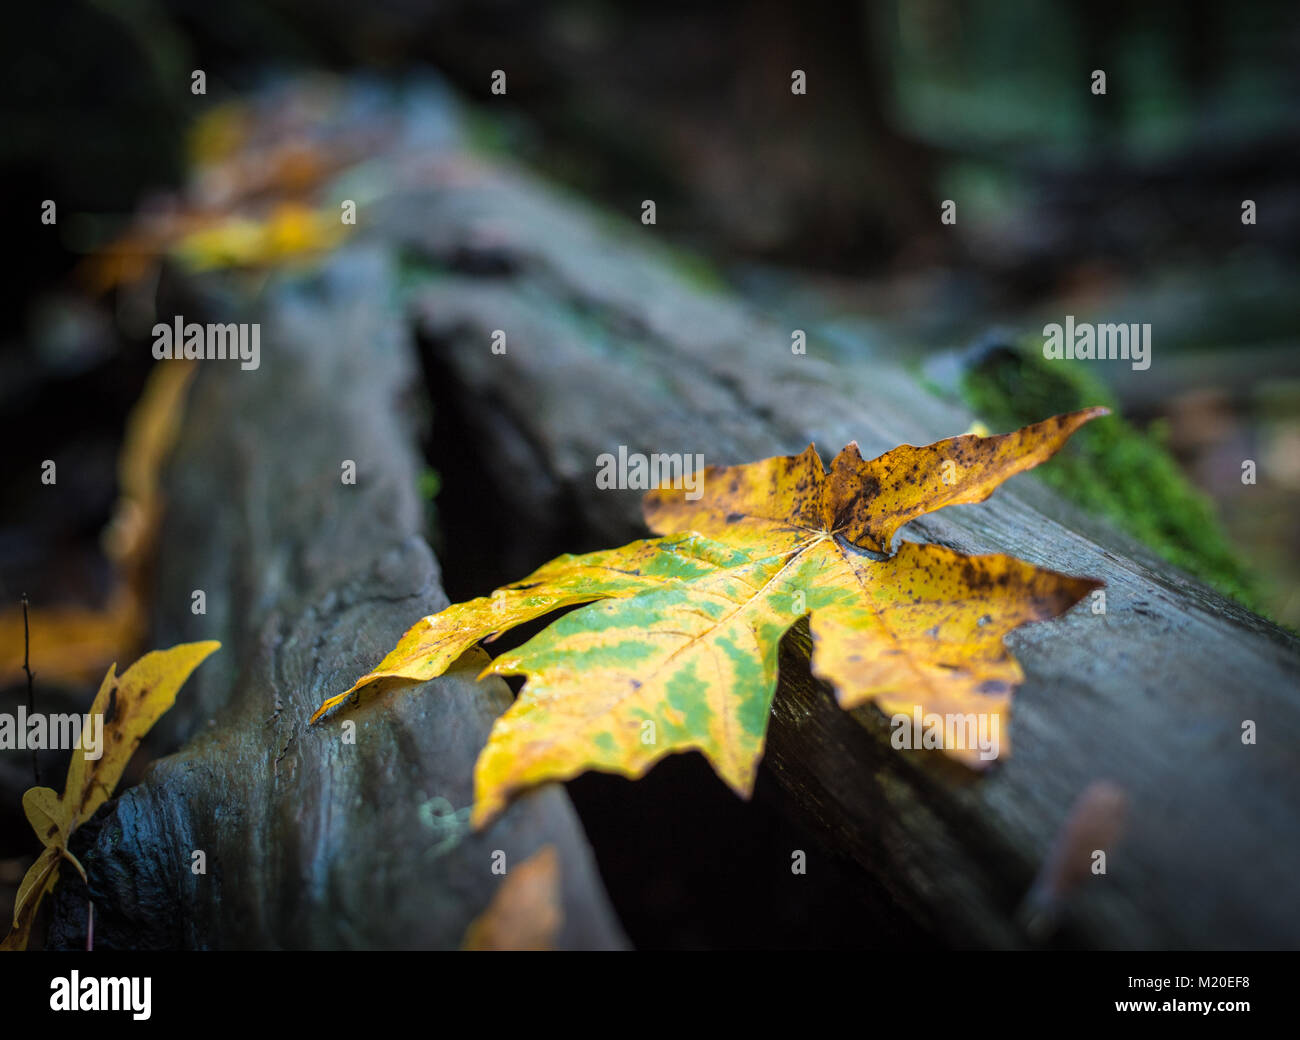 Vibrant yellow autumn leaf laying on a wet, out of focus tree Stock Photo